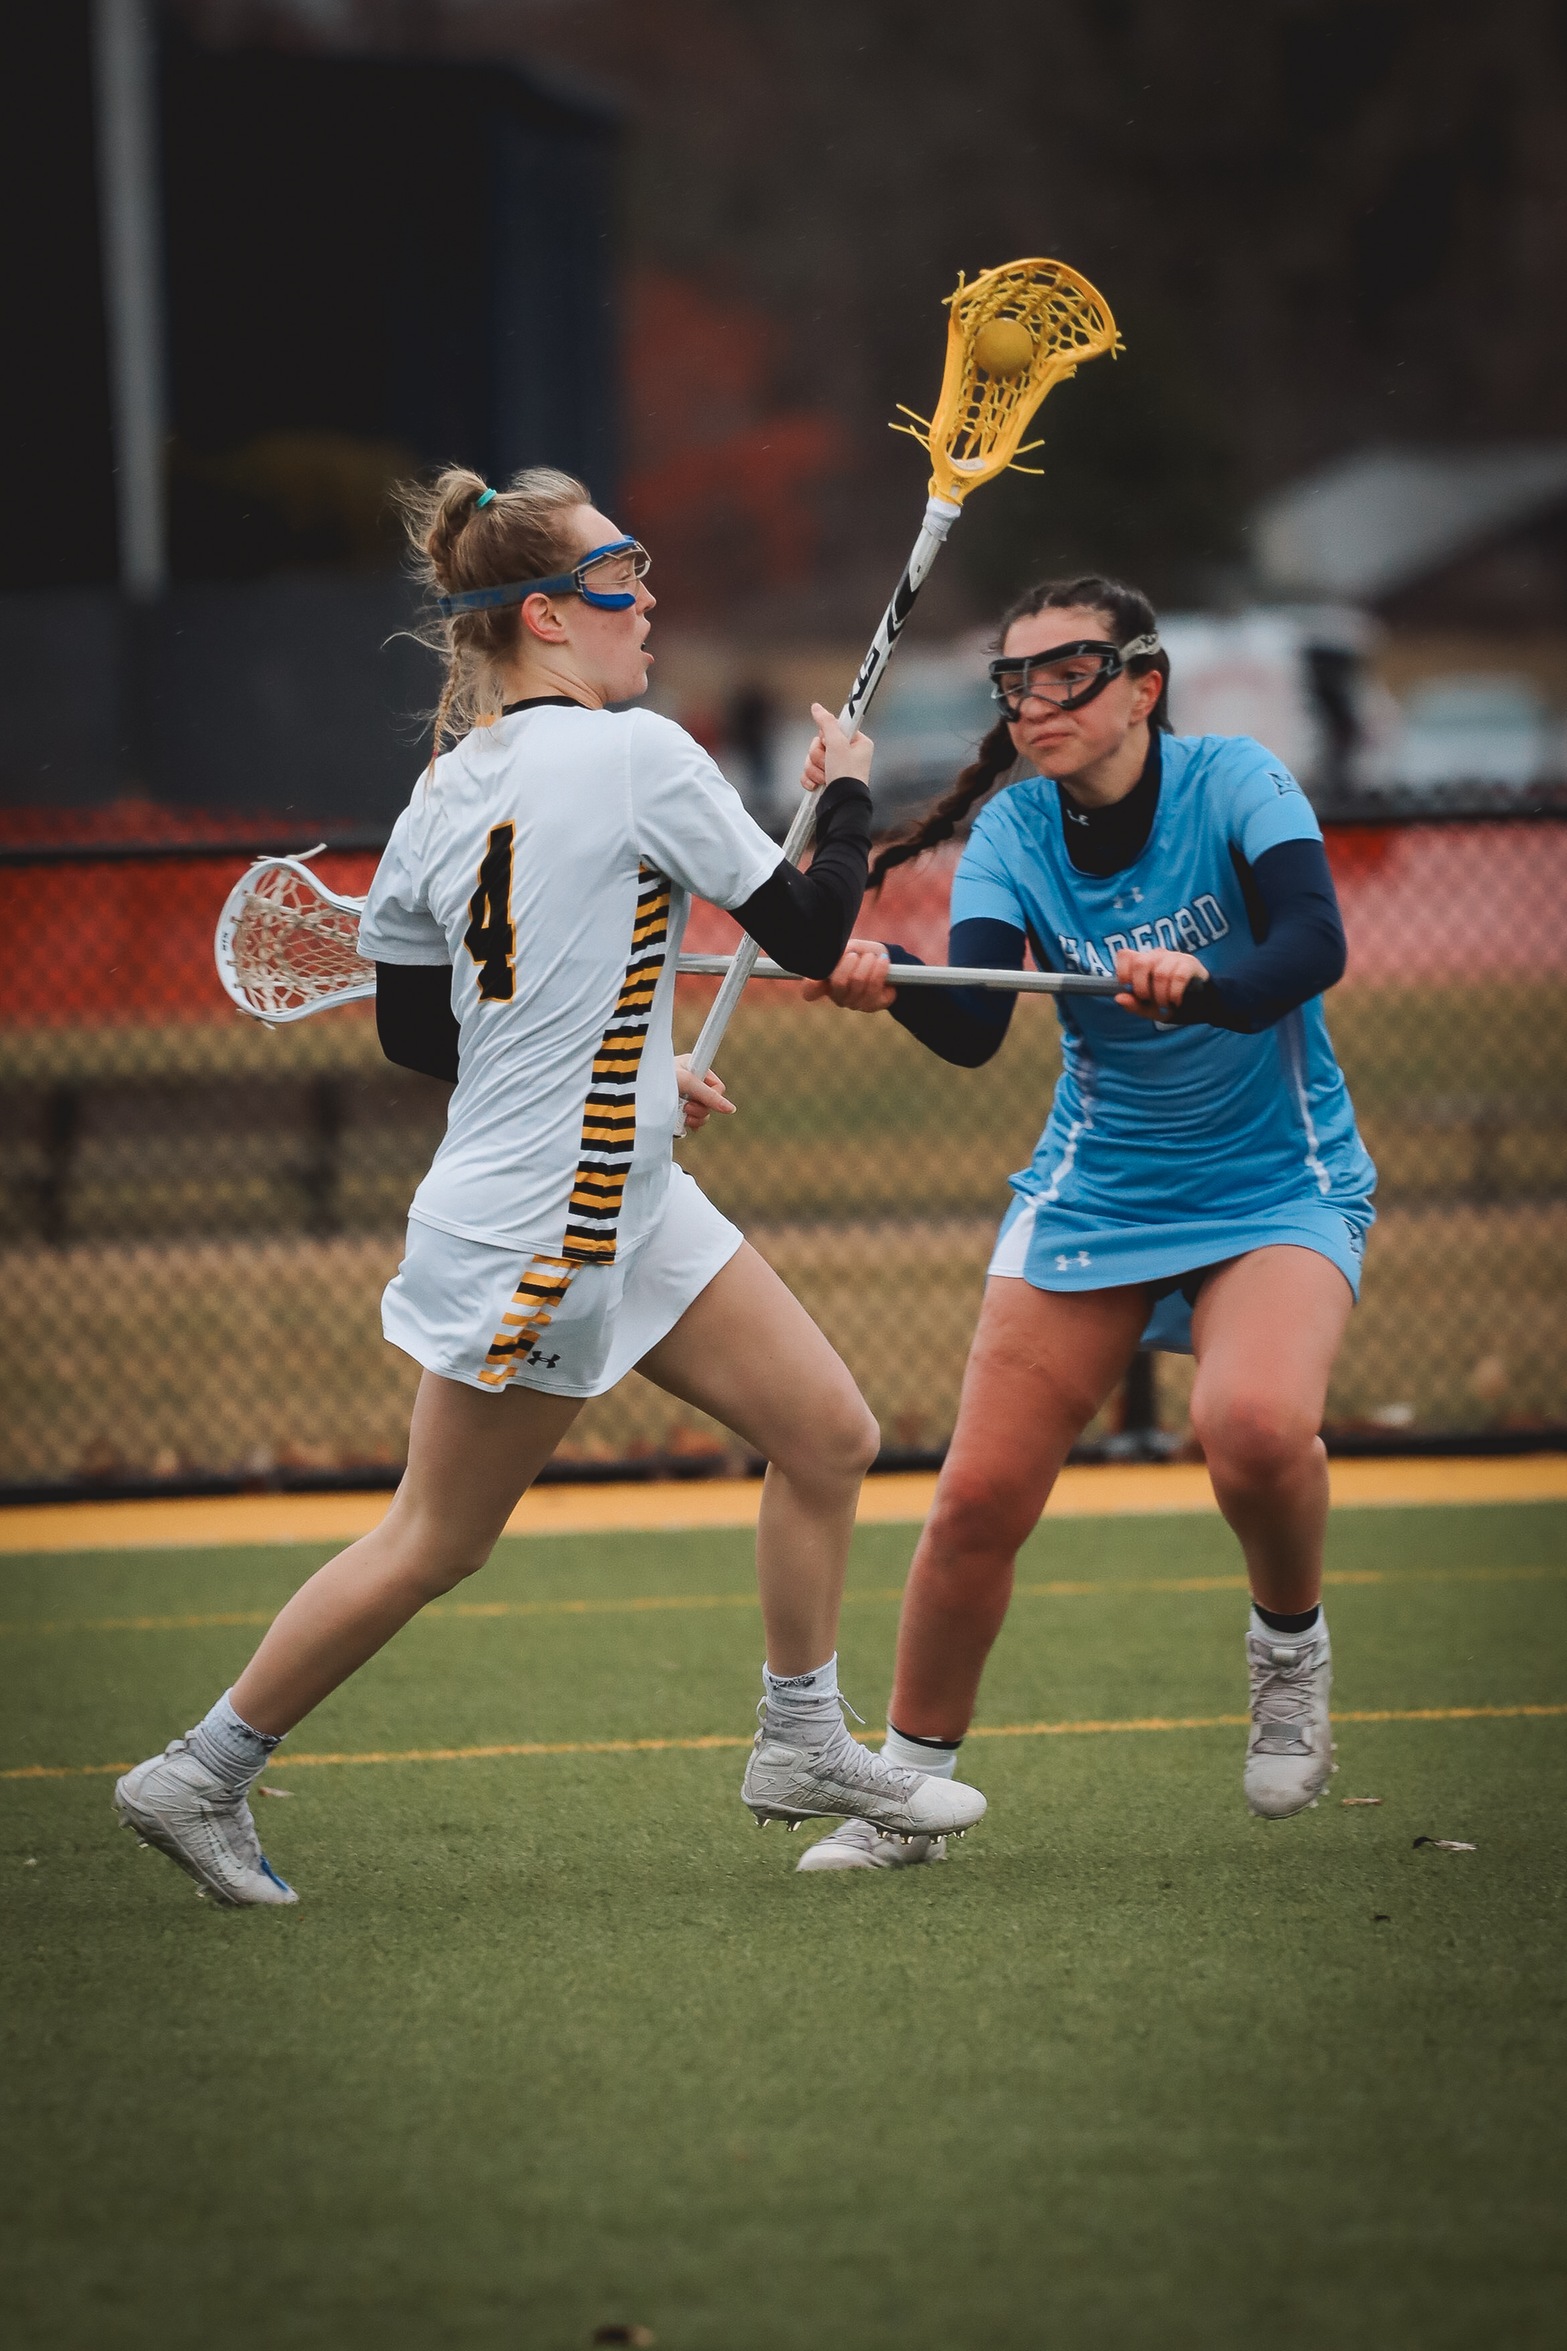 Tribunes Open Season With Win Over #3 Ranked Harford